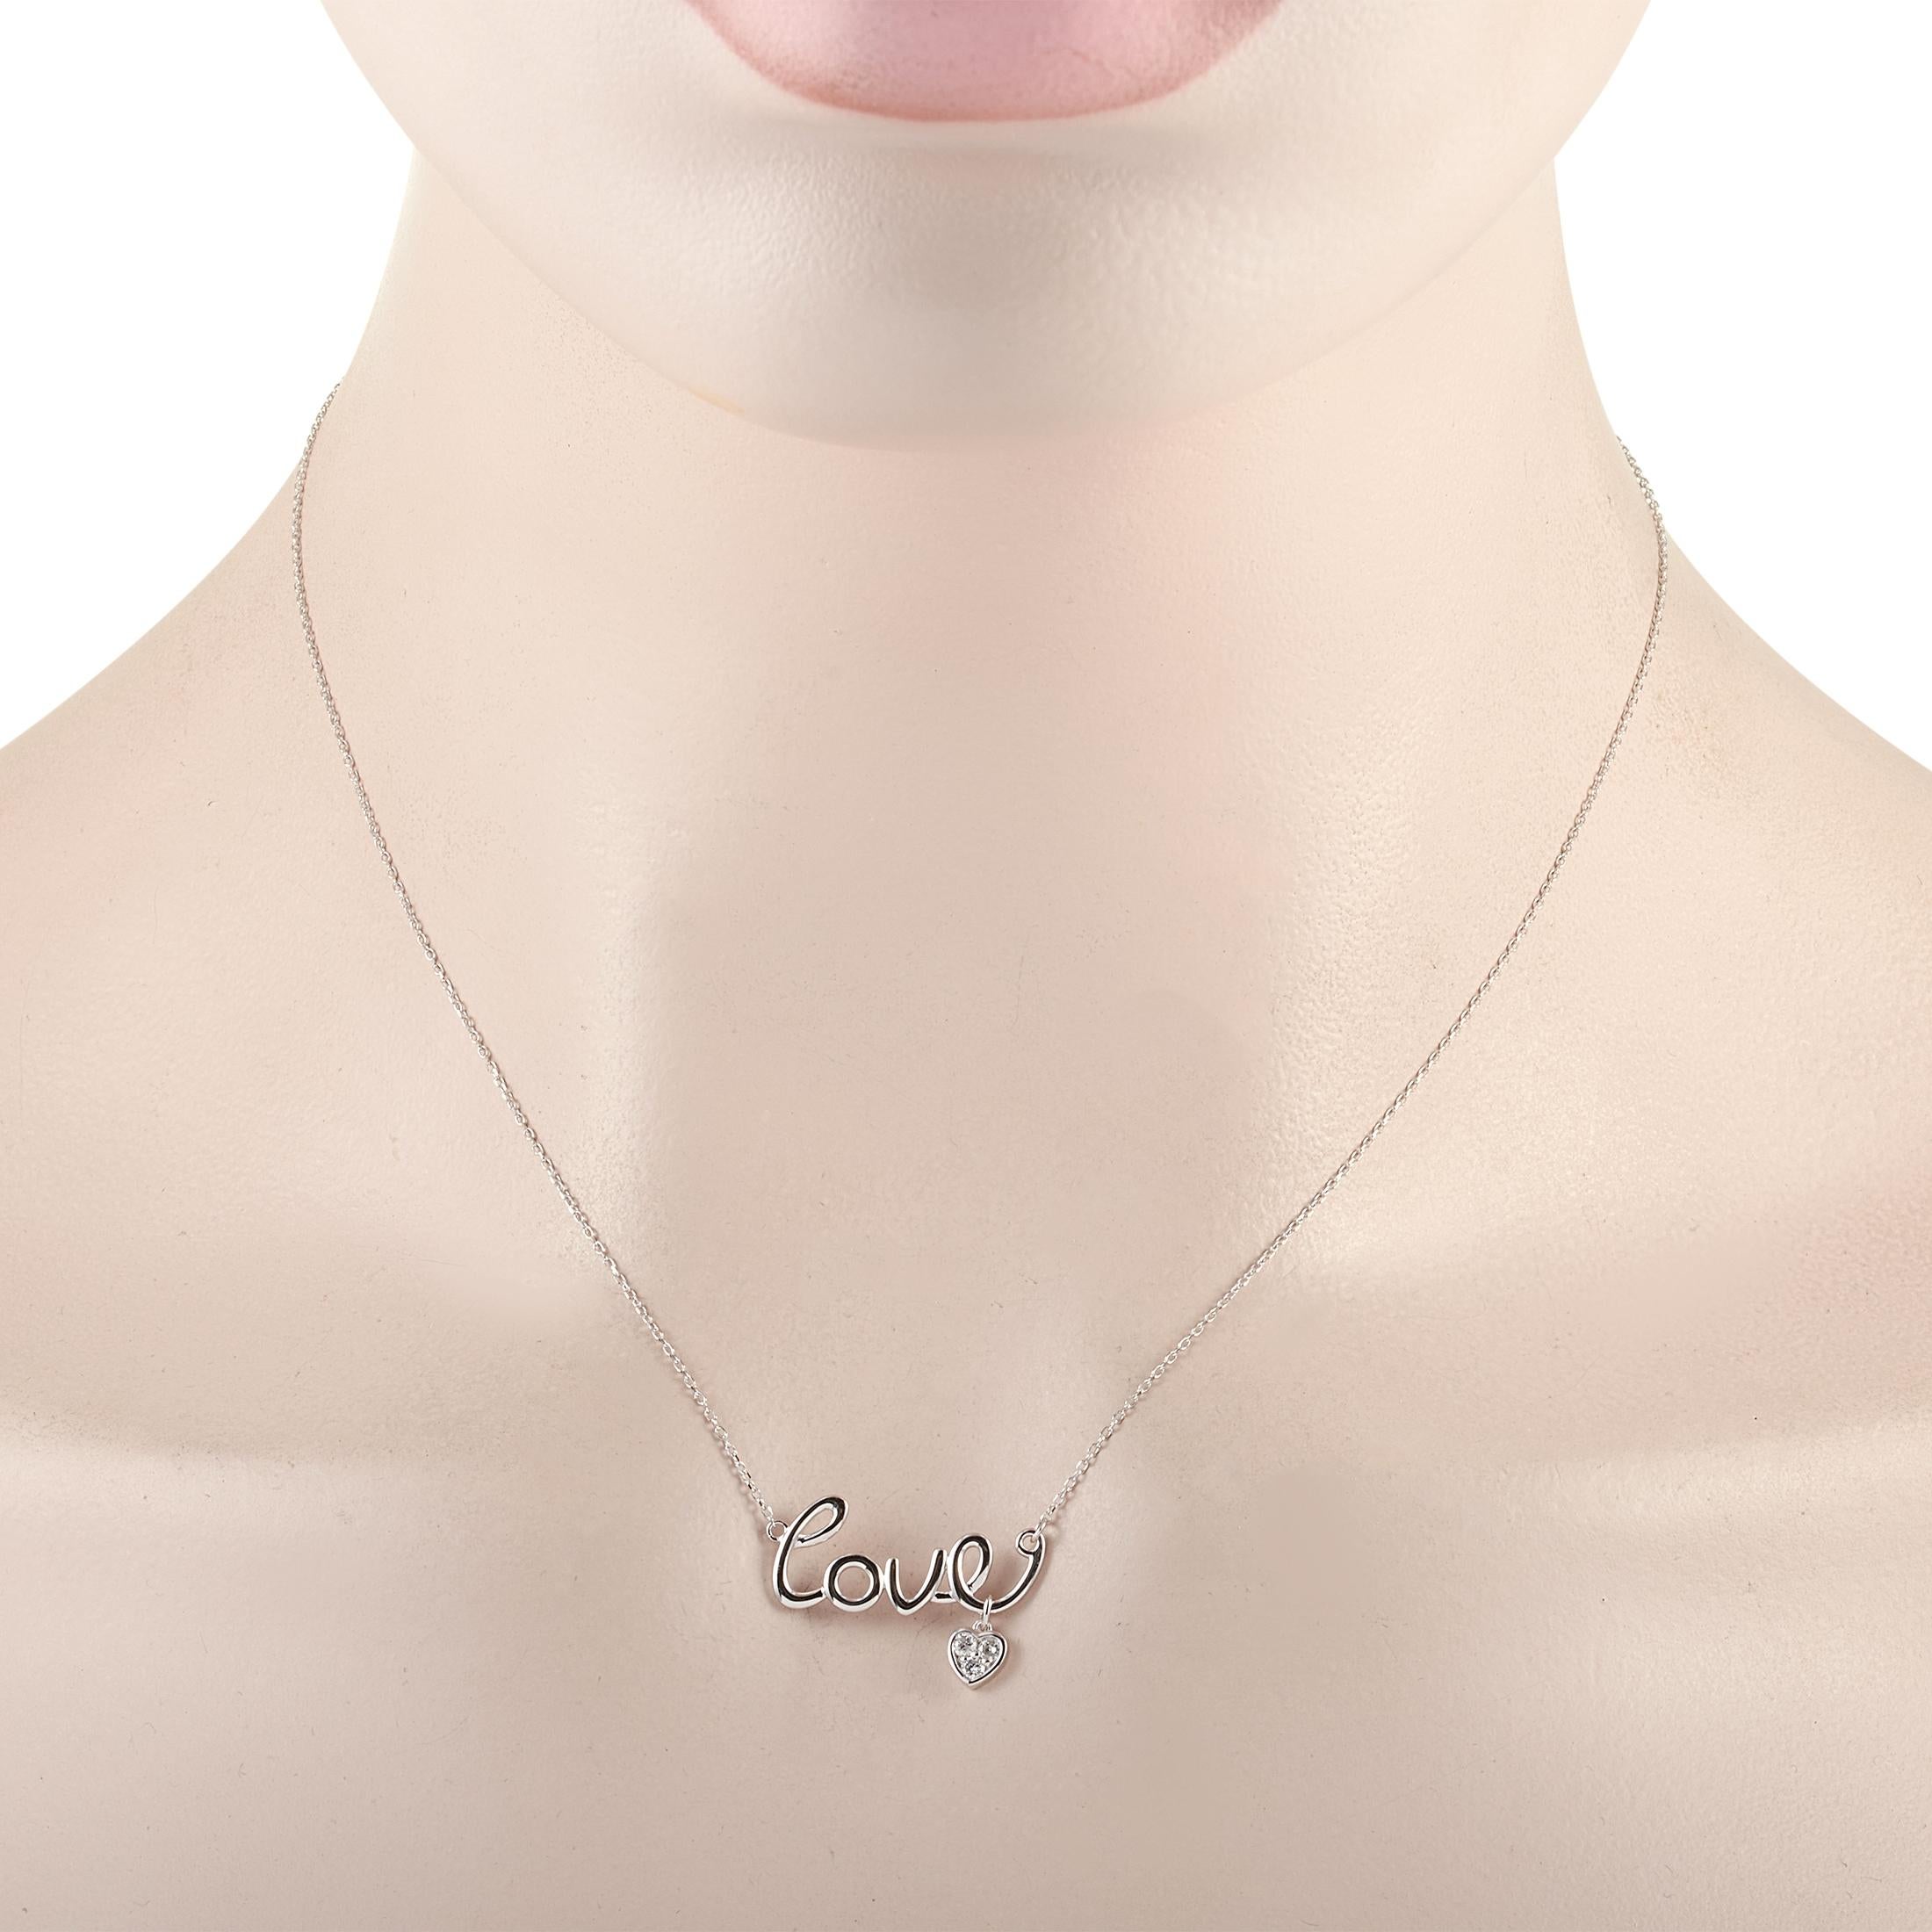 This LB Exclusive necklace is crafted from 14K white gold and weighs 2.4 grams. It is presented with a 15” chain and boasts a love pendant that measures 0.50” in length and 1” in width. The necklace is set with diamonds that total 0.10 carats.
 
